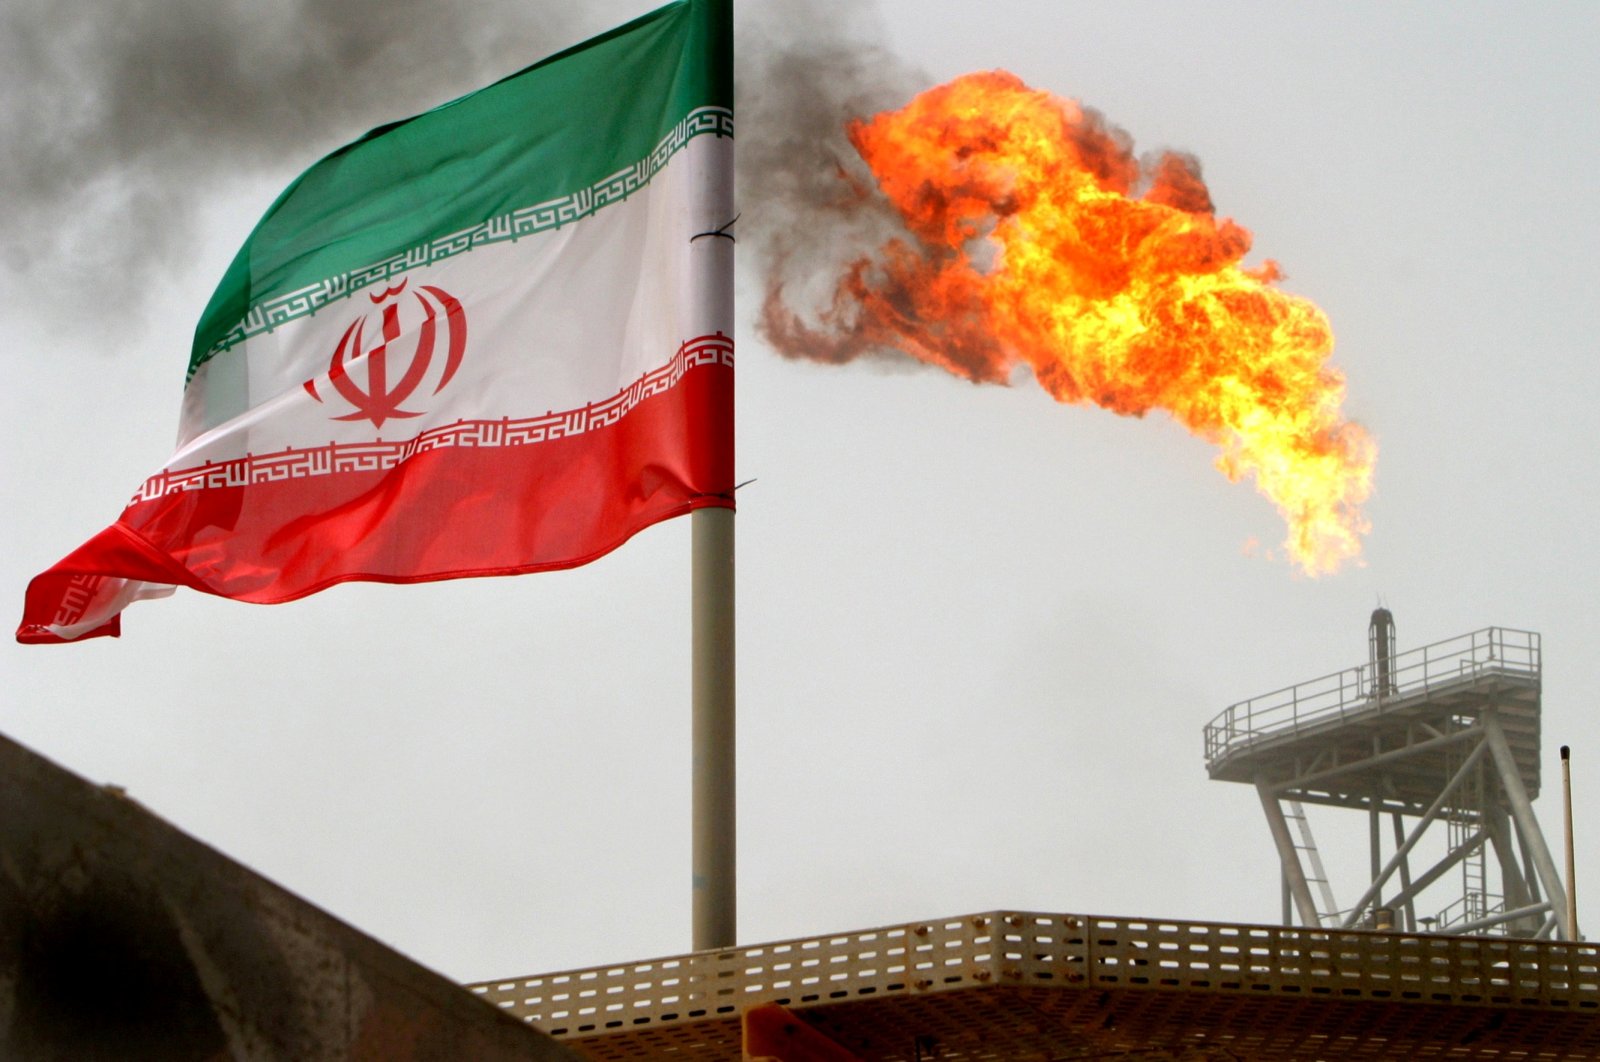 A gas flare on an oil production platform is seen alongside an Iranian flag in the Persian Gulf, July 25, 2005. (Reuters Photo)